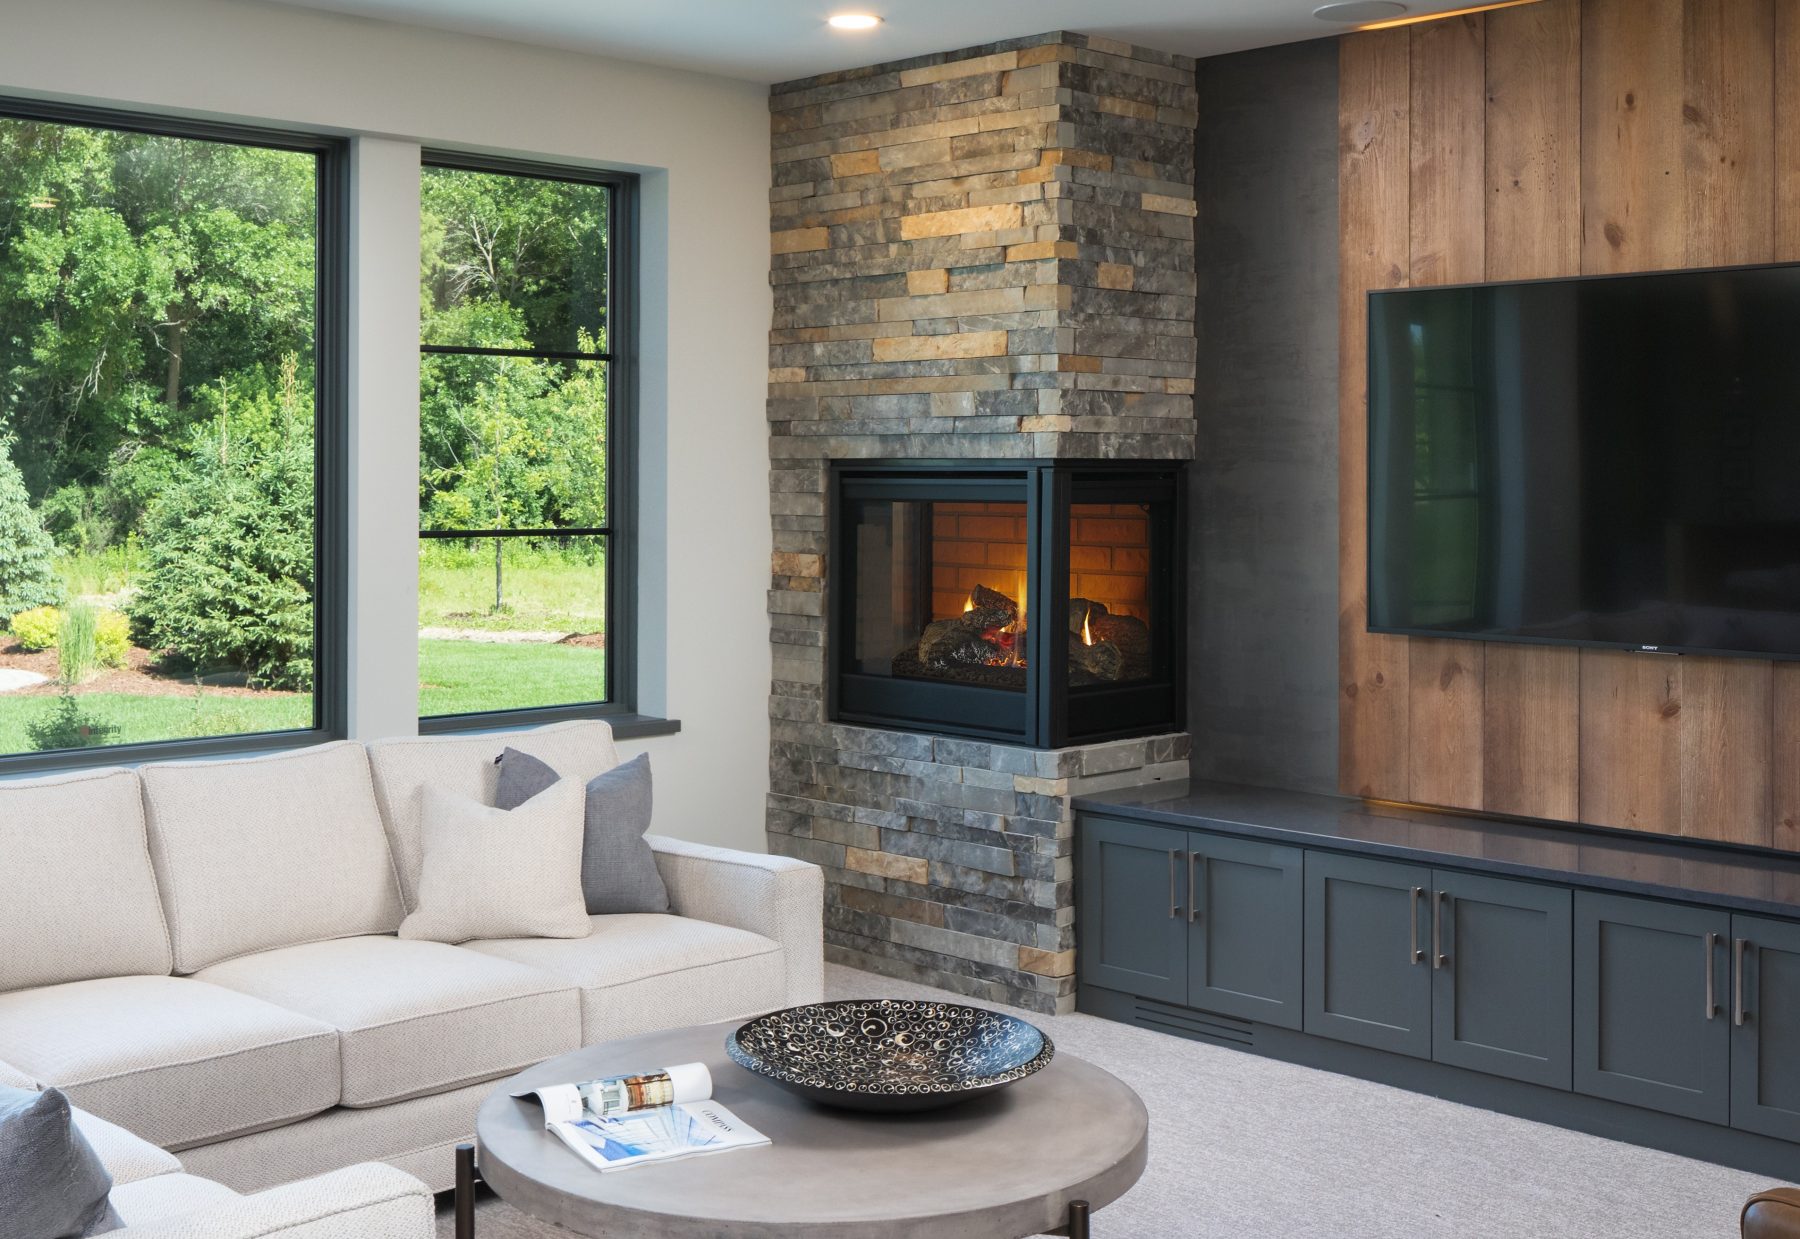 7 Trends Heating Up The Fireplace, Best Fireplace Design For Heat